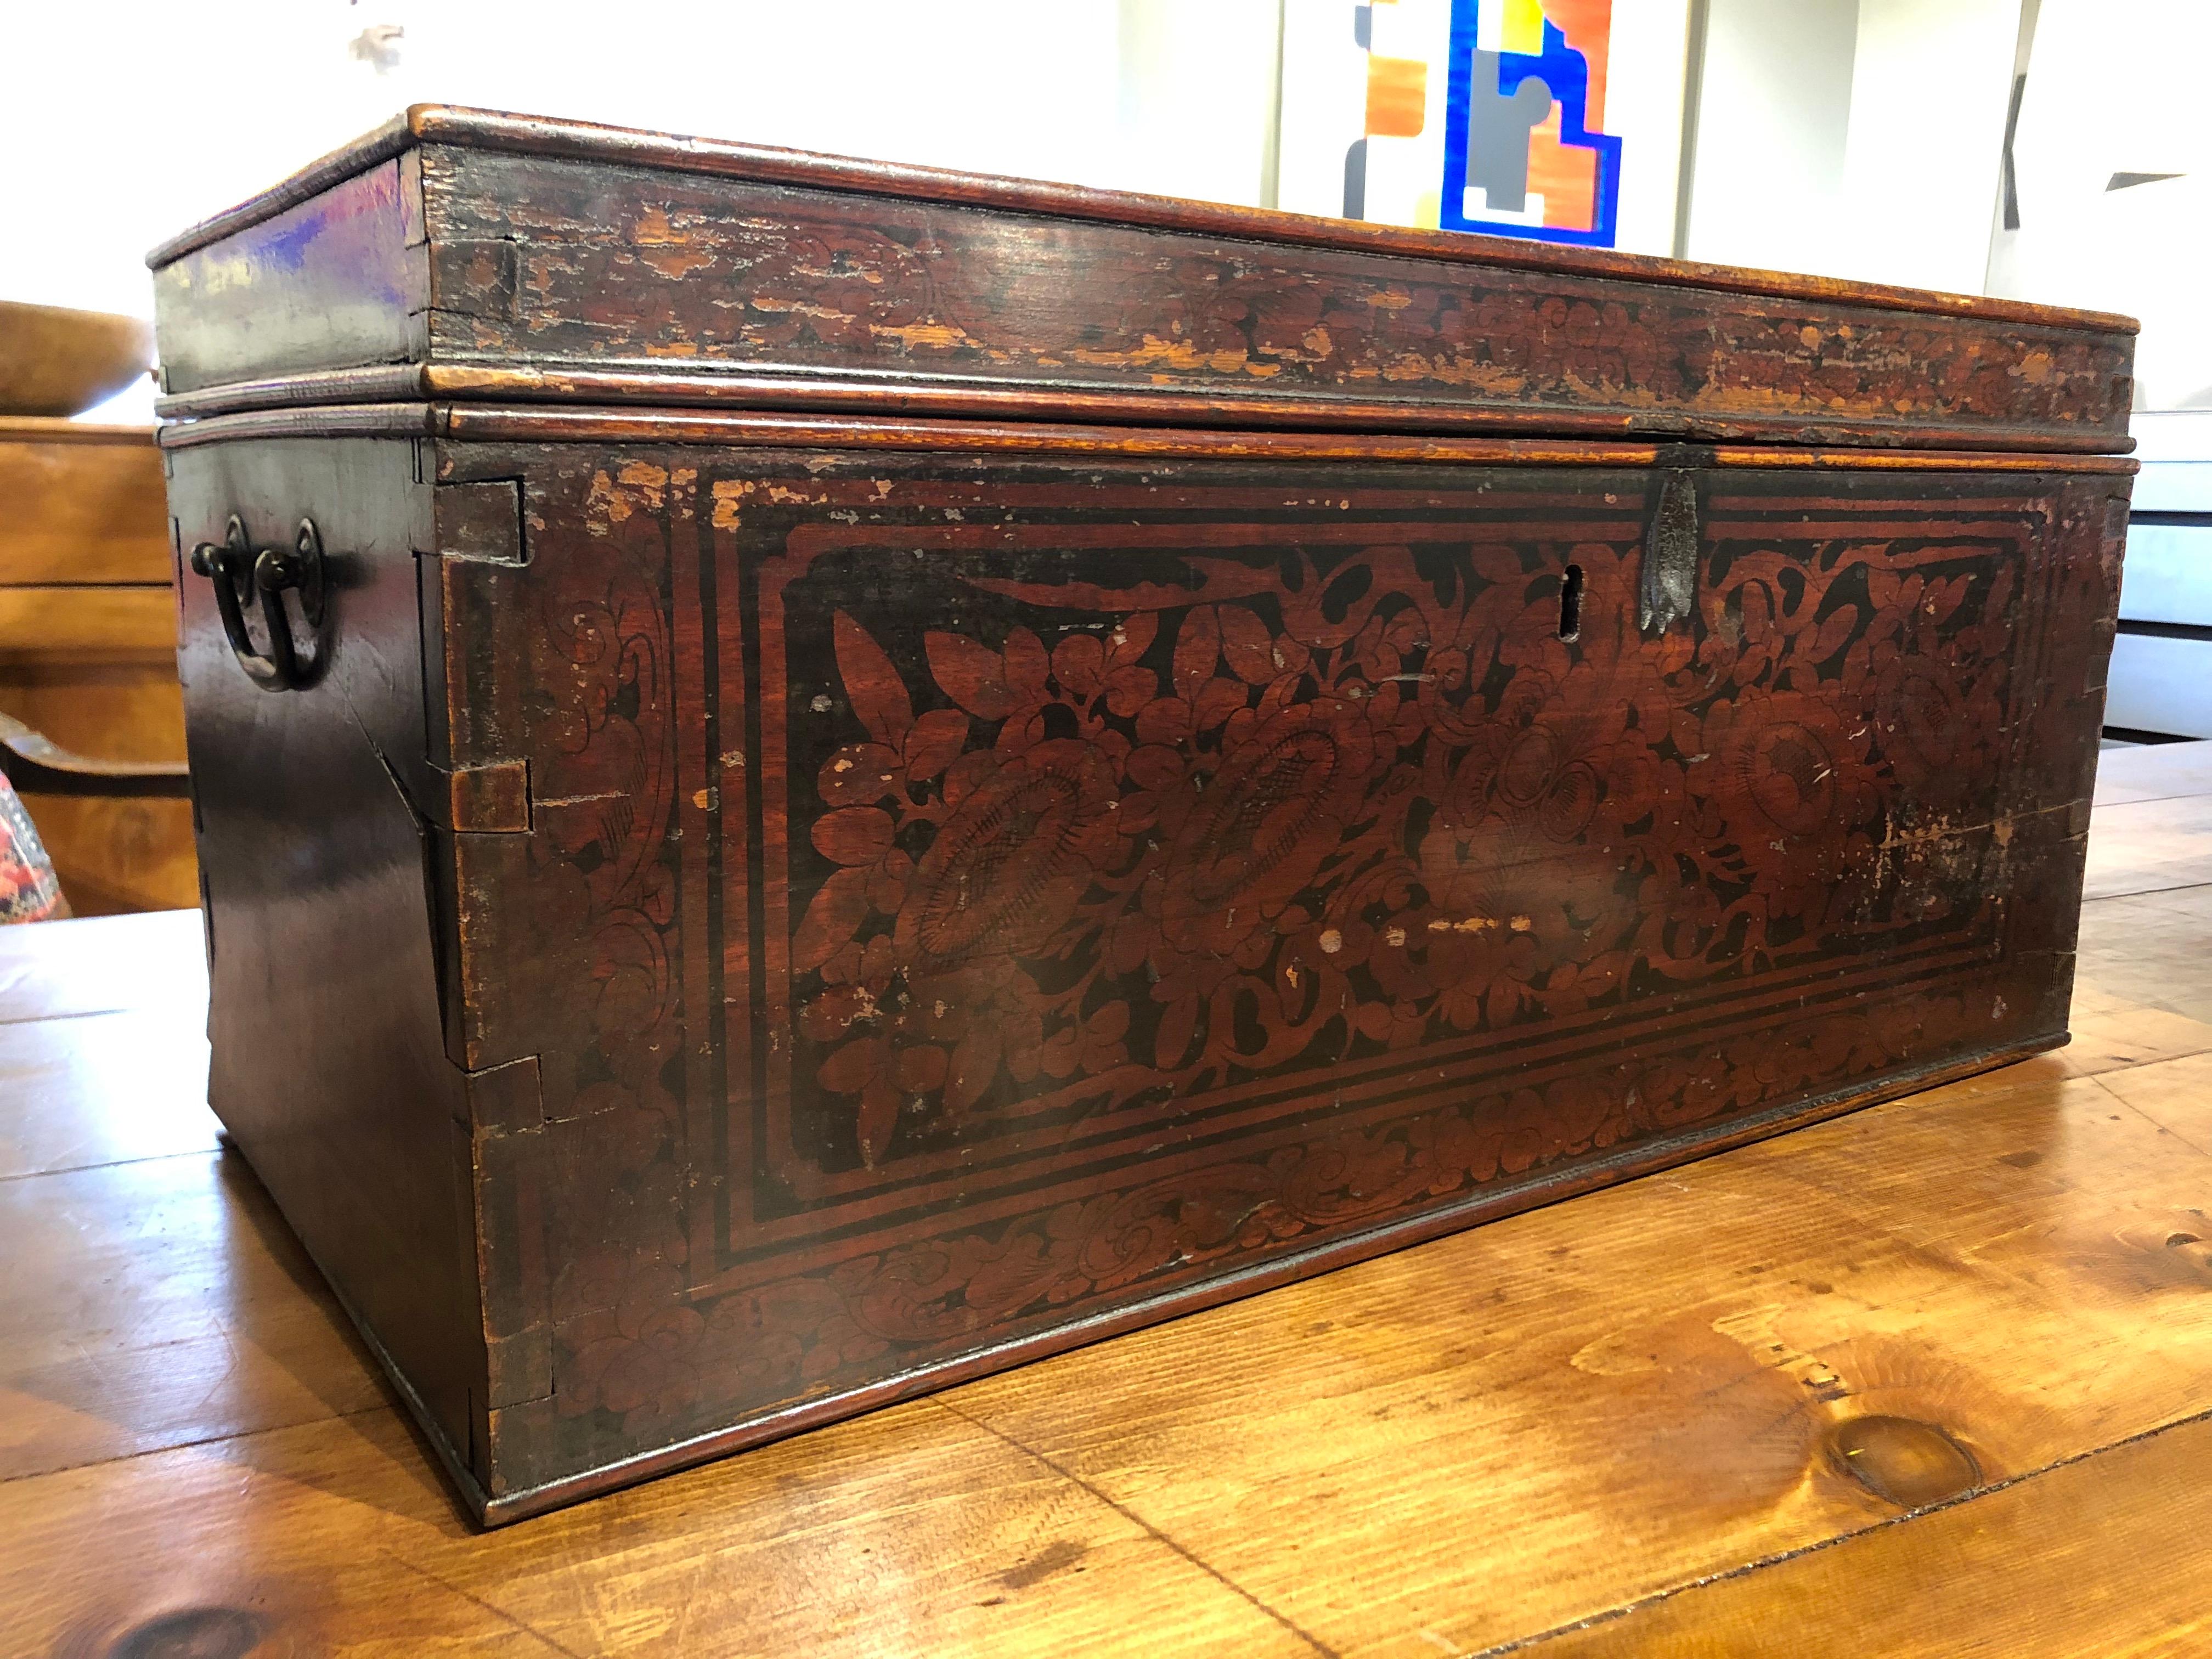 Made of richly patinated teak with intricate red and black lacquer floral decoration, this 19th century red and black lacquered Indonesian document box has dove tailed construction retaining the original brass carrying handles. A totally unique way